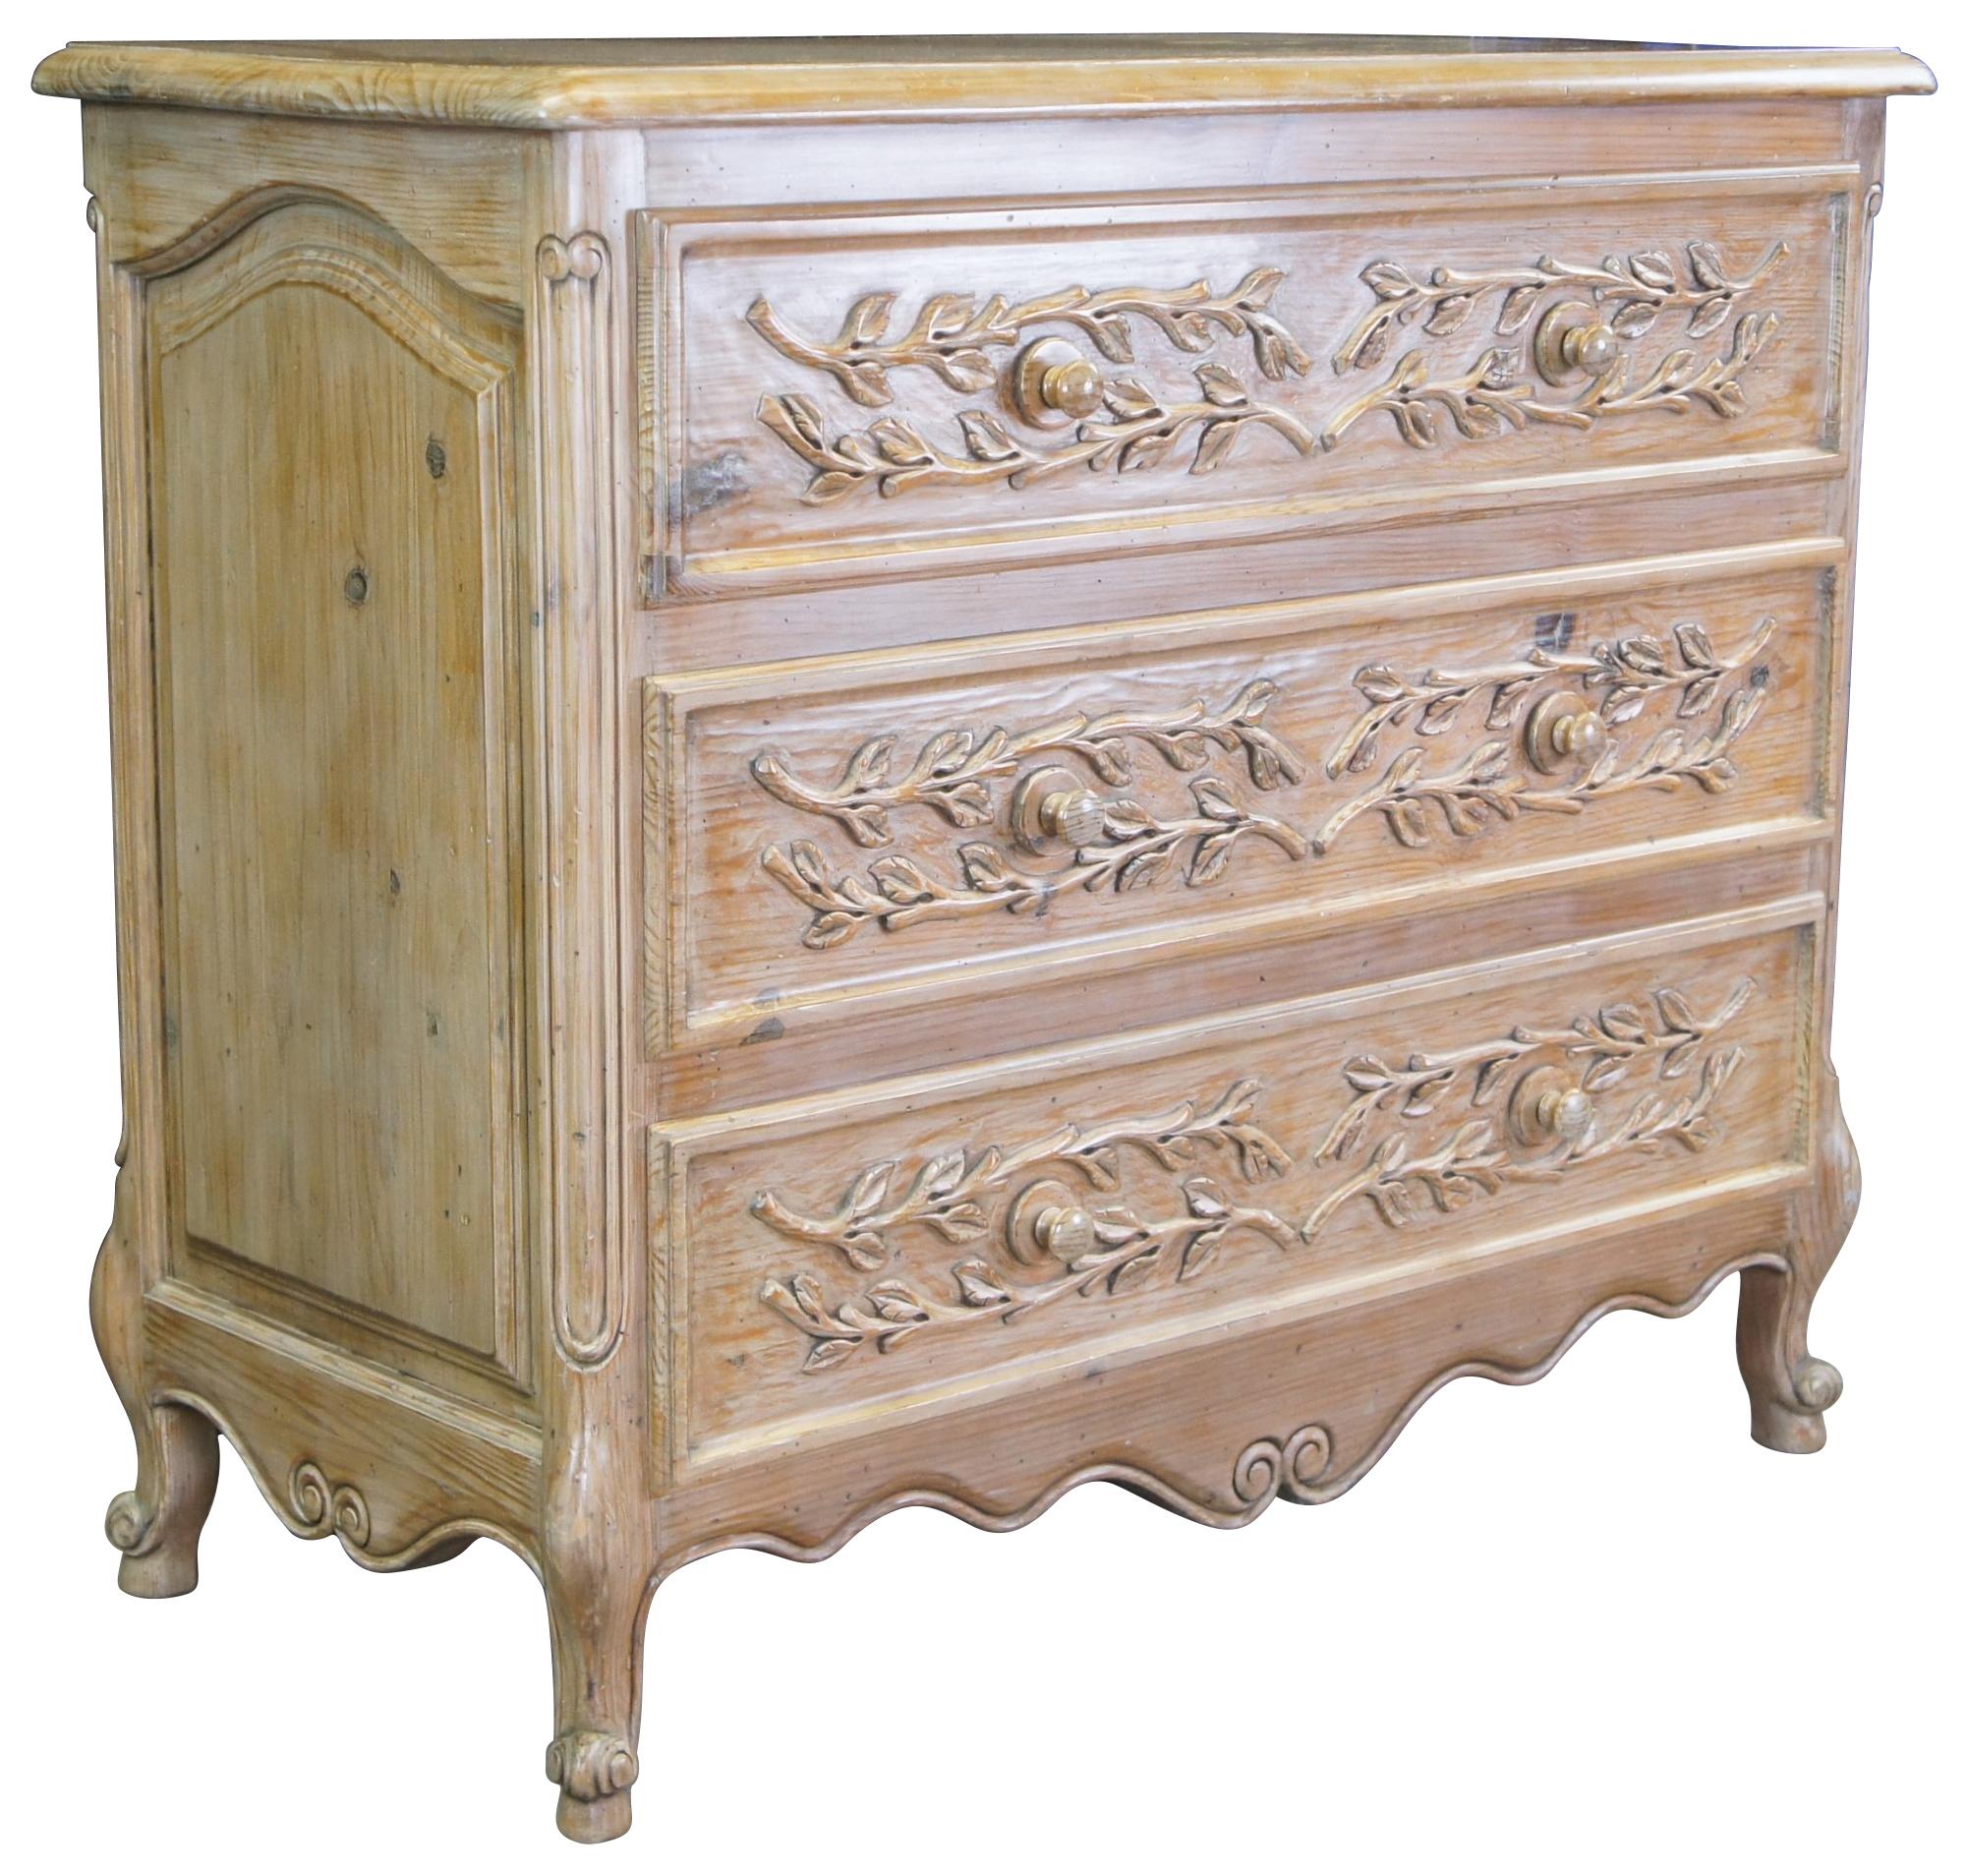 A lovely French farmhouse dresser or chest, circa 1970s. Made from pine with three dovetailed drawers, highlighted by an applied vine and leaf motif. The chest has recessed and arched moldings along the side and features a serpentine lower apron